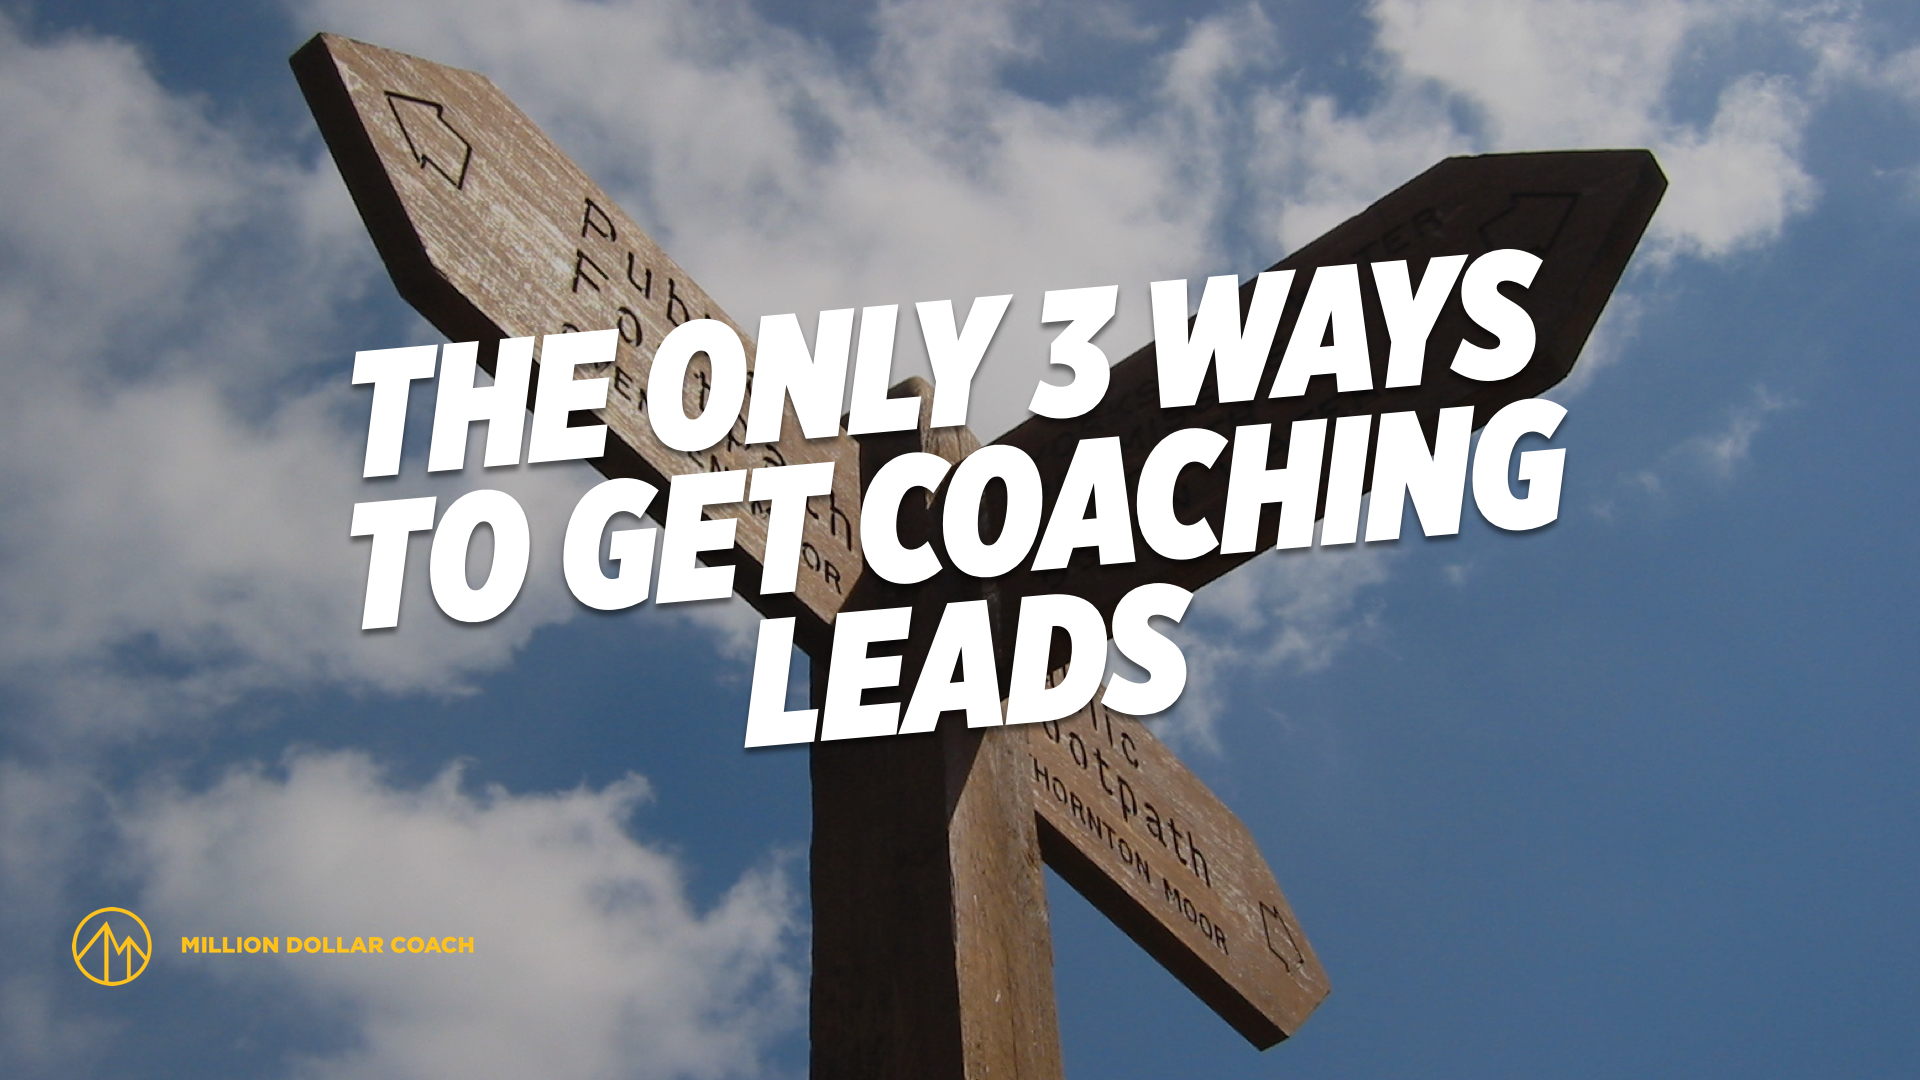 Lead Generation For Life Coaches: PL leads